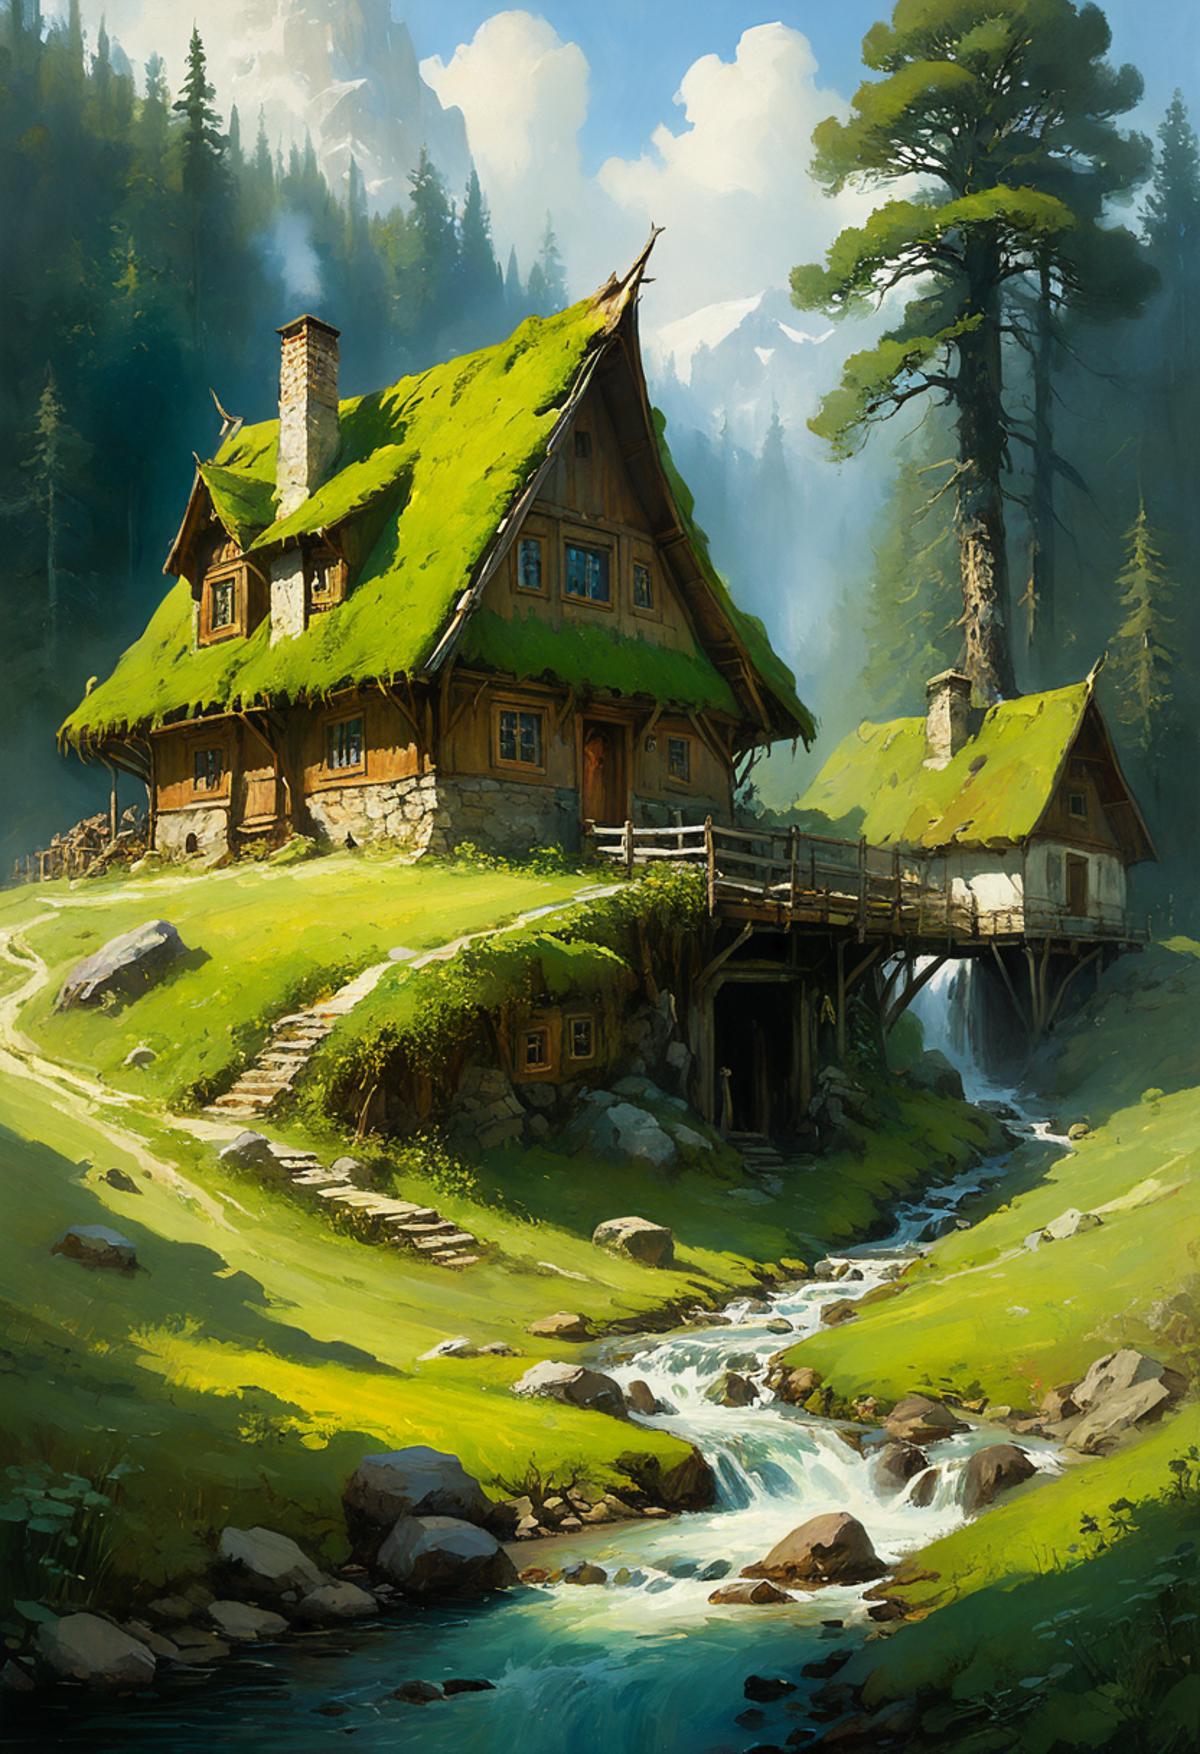 A painting of a house with a bridge and a waterfall.